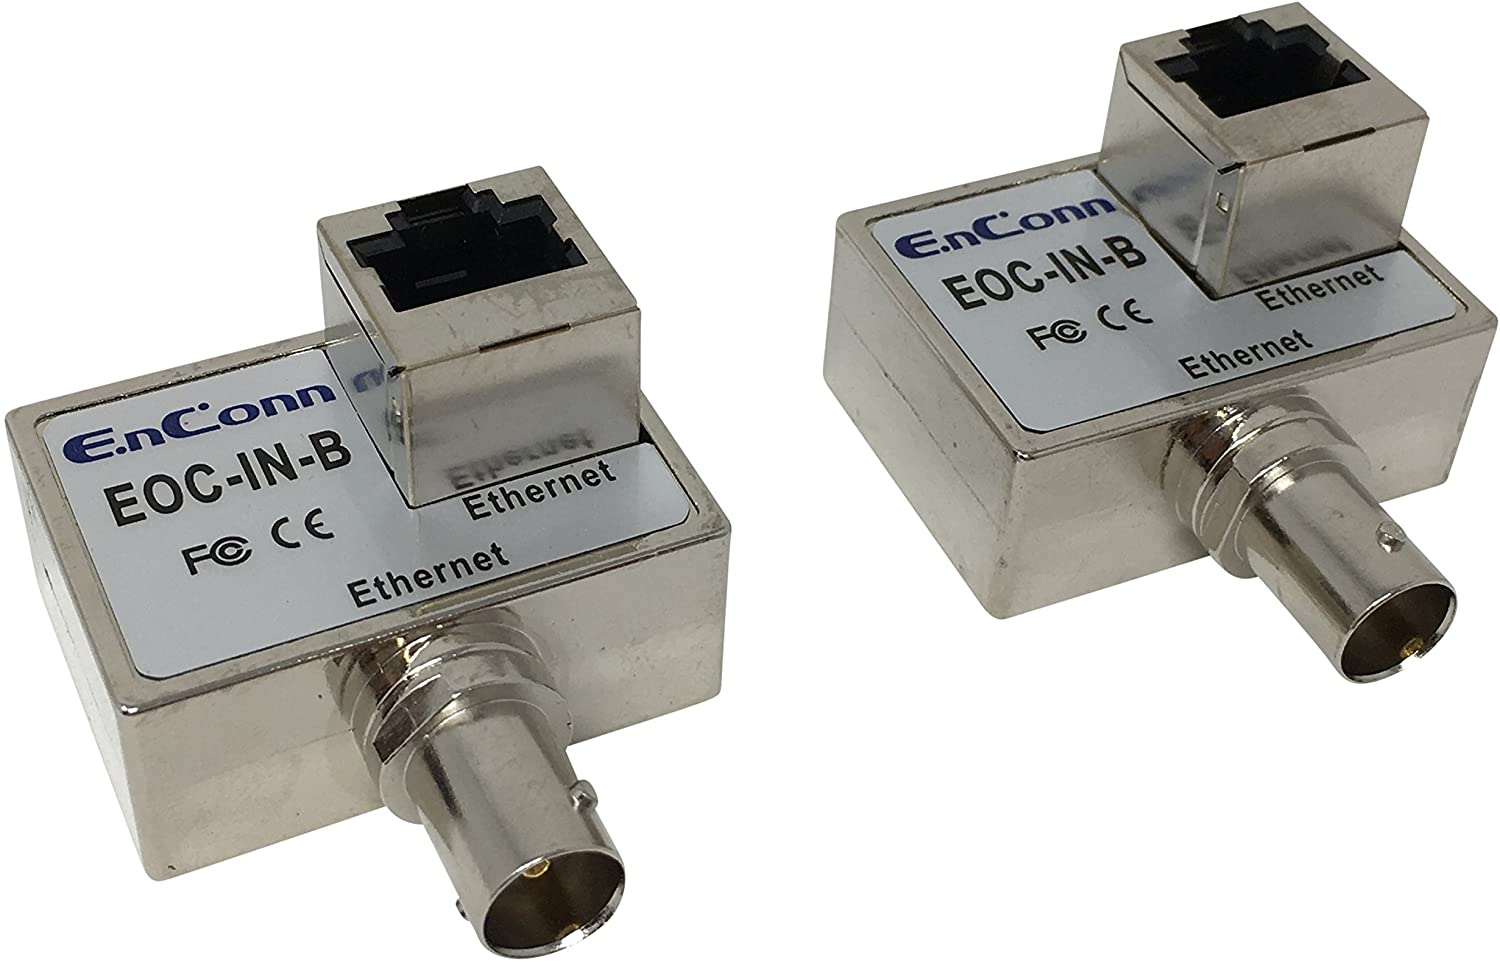 Ethernet Over Coaxial, IP to Coax Converter Eoc Converter 2km